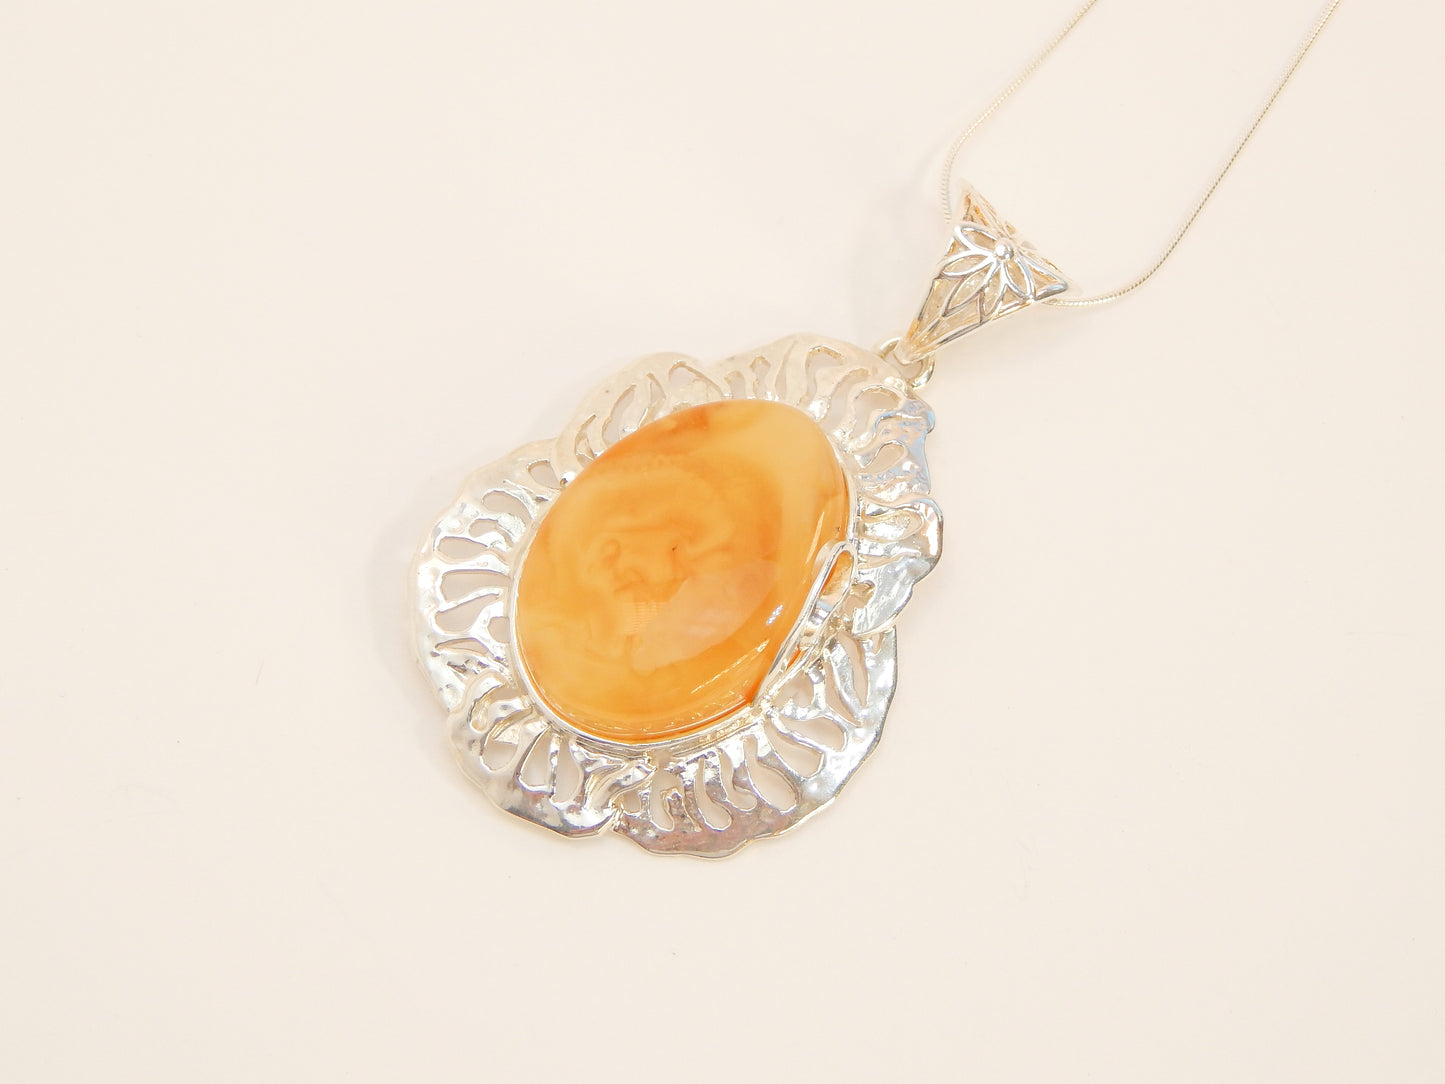 Handmade Natural Baltic Honey Amber Pendant Necklace in 925 Sterling Silver